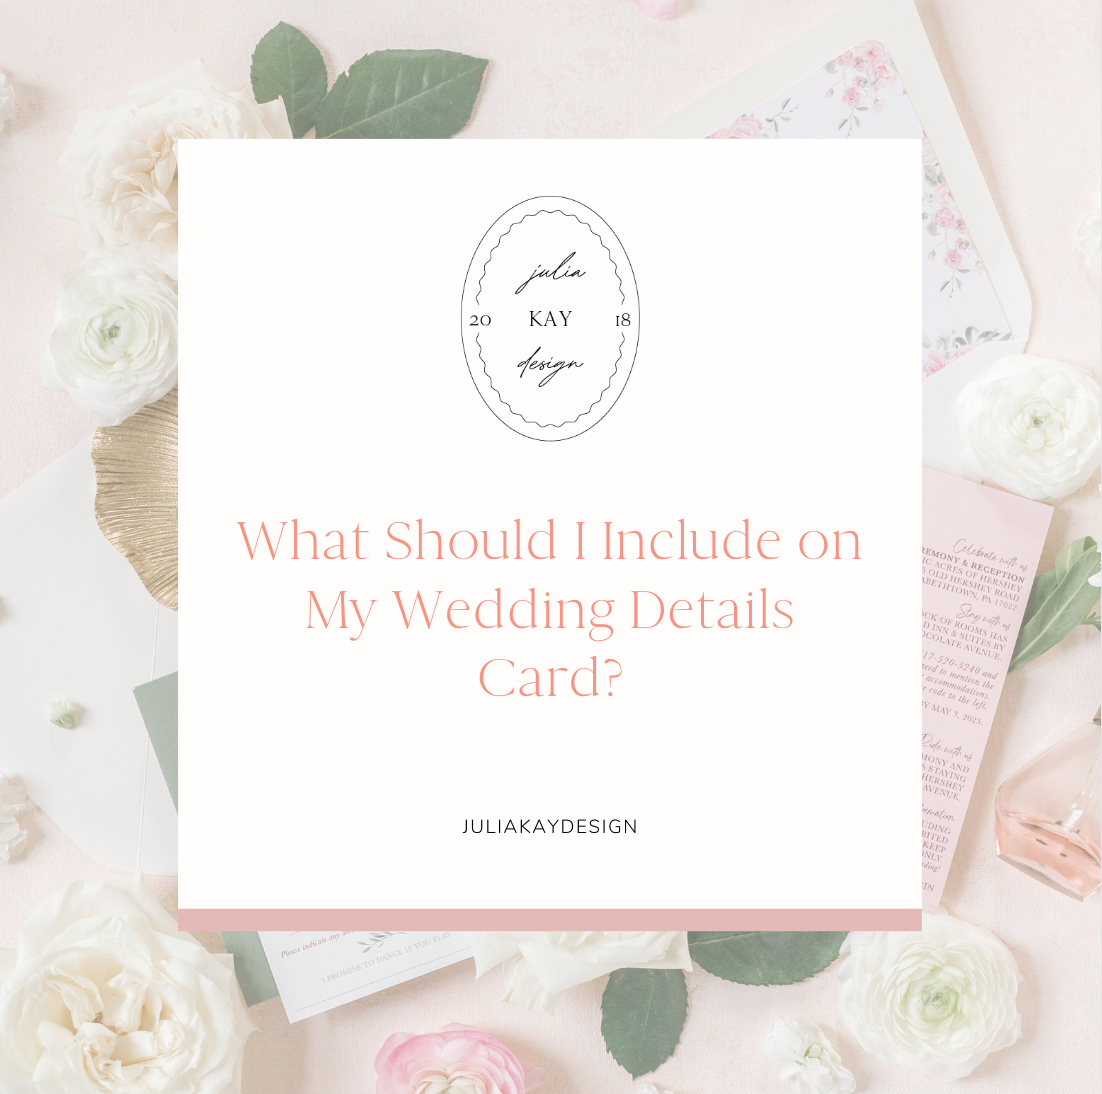 What Should I Include on my Wedding Invitation Details Card?